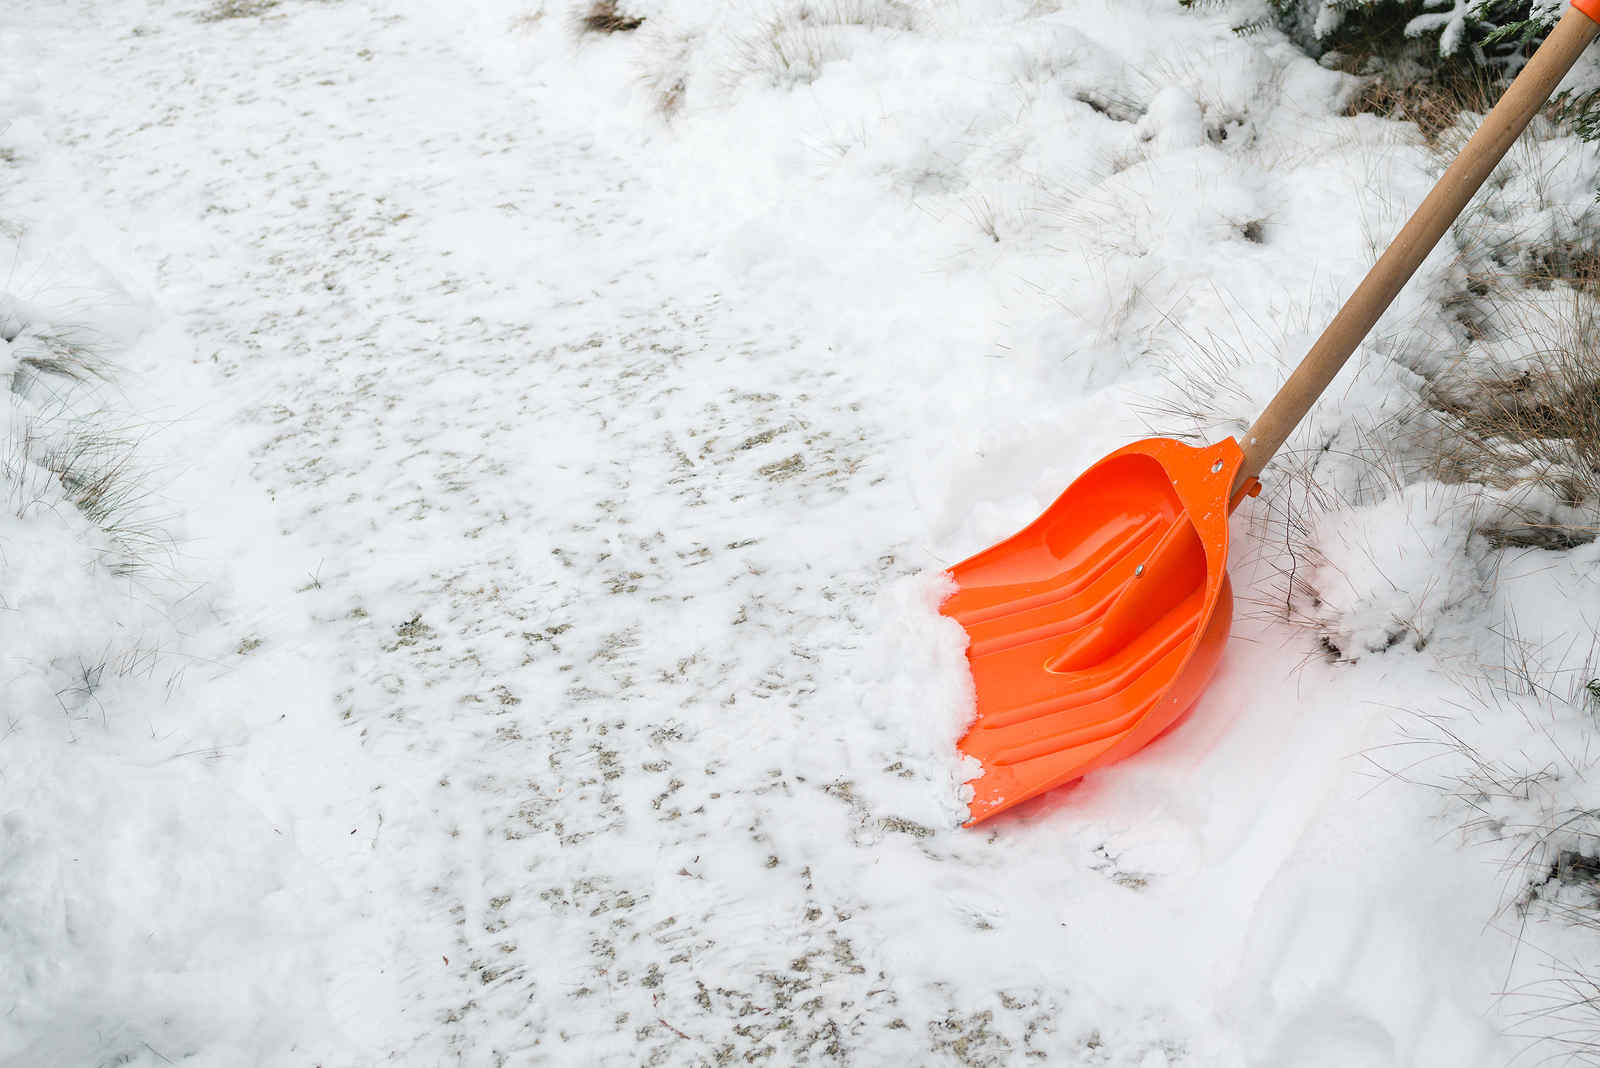 How to Shovel, Melt, and Remove Frozen Snow